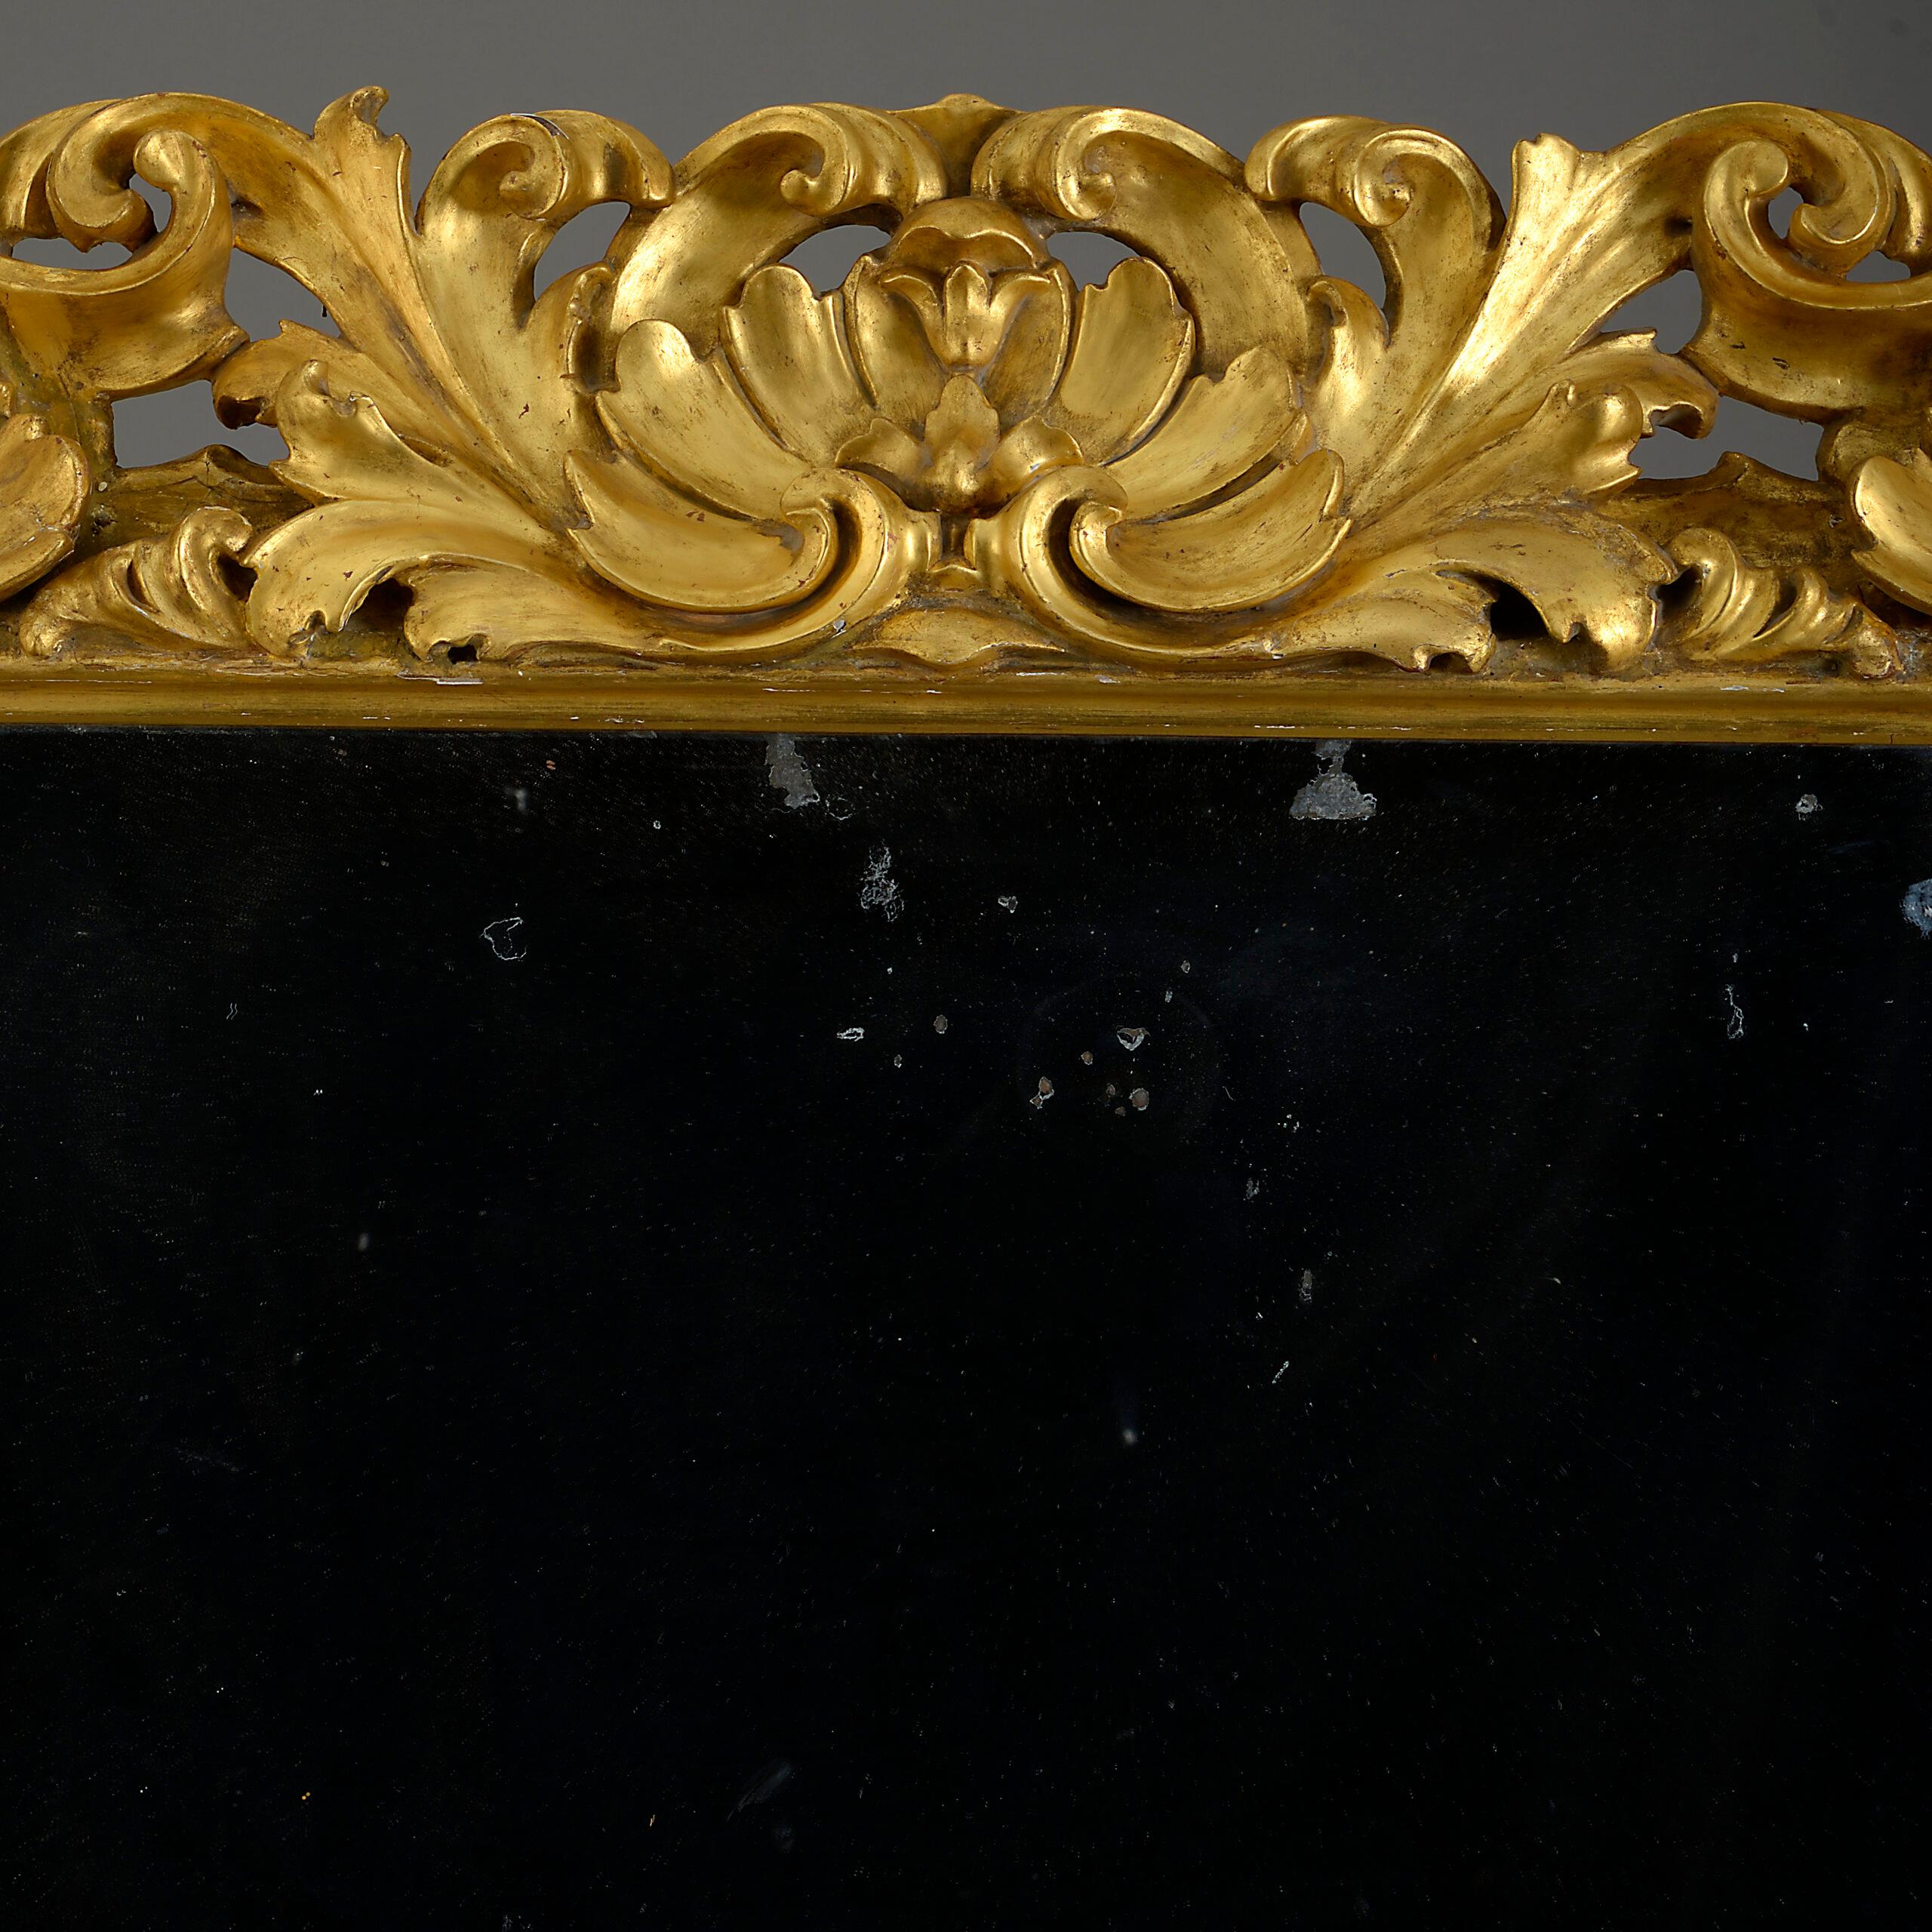 A large early eighteenth century Baroque mirror, the profusely carved foliate giltwood frame housing a period mercury glass plate

Circa 1700 Florence

Dimensions: 40.5 W x 4 D x 48.5 H inches
103 W x 10 D x 123 H cm